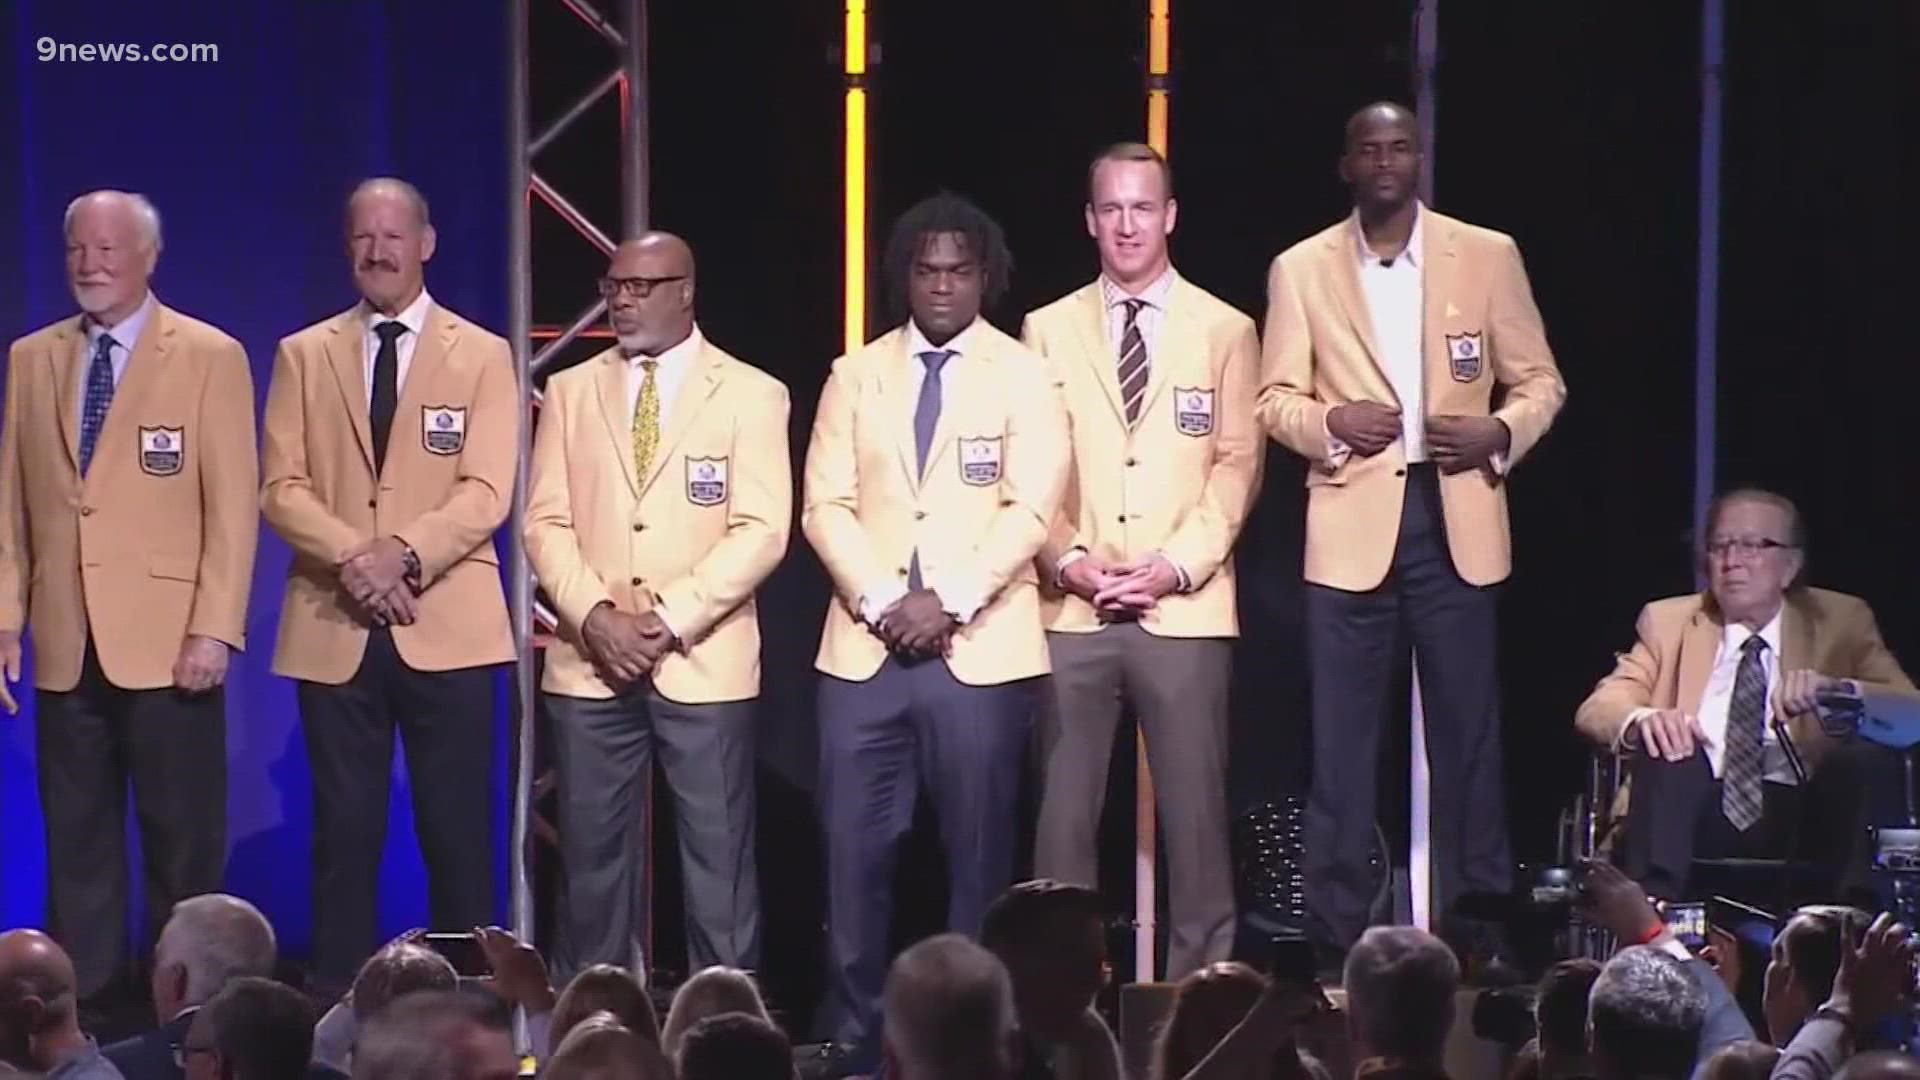 Steve Atwater, Peyton Manning and John Lynch were inducted into the Pro Football Hall of Fame this weekend.